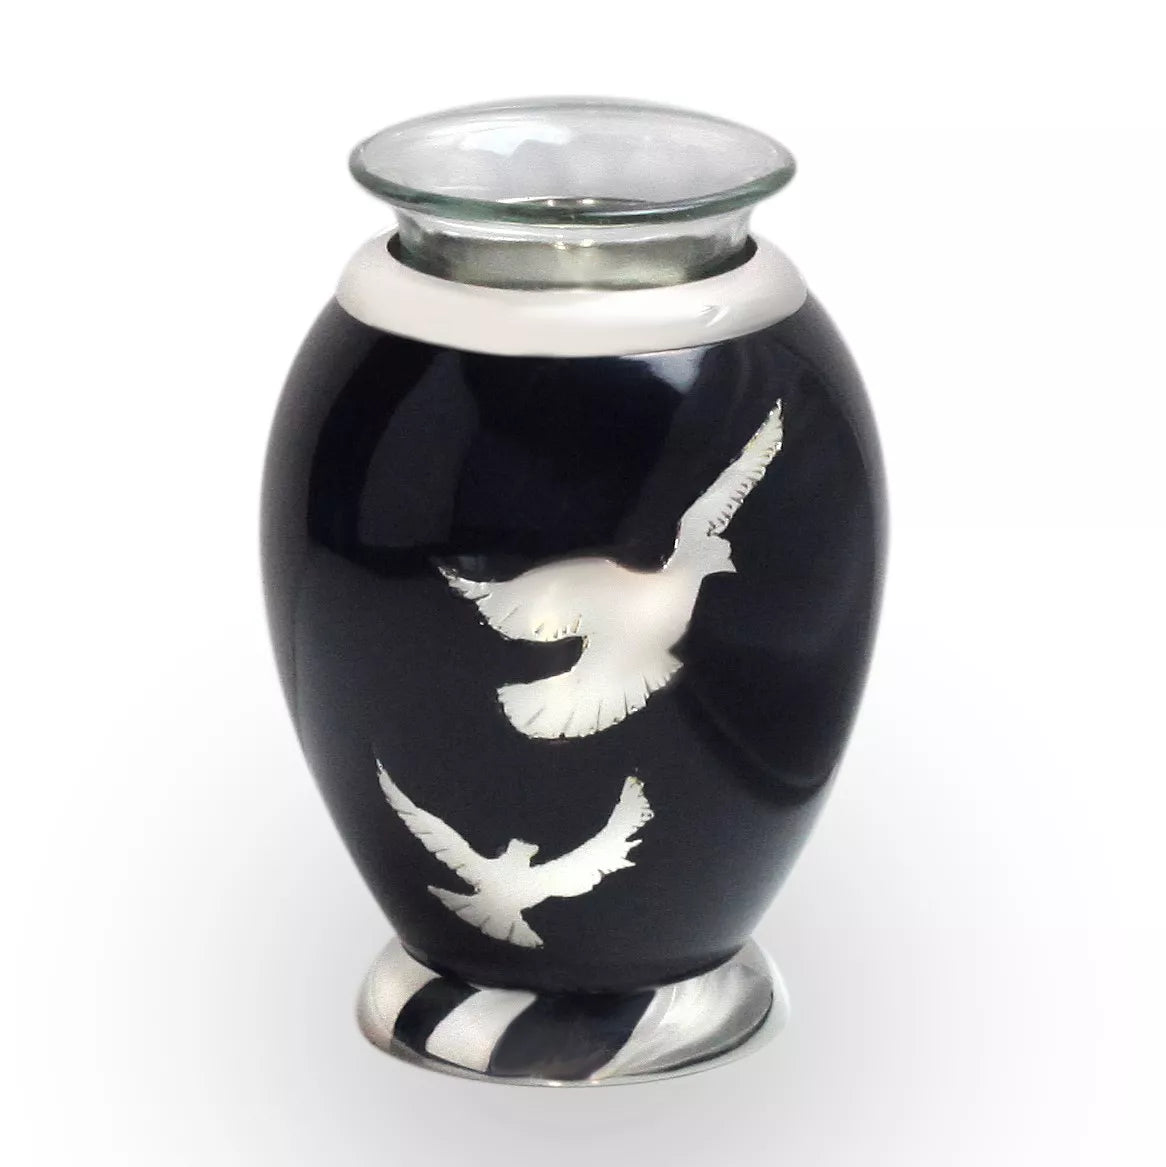 Mini urn and wax holder - black with birds